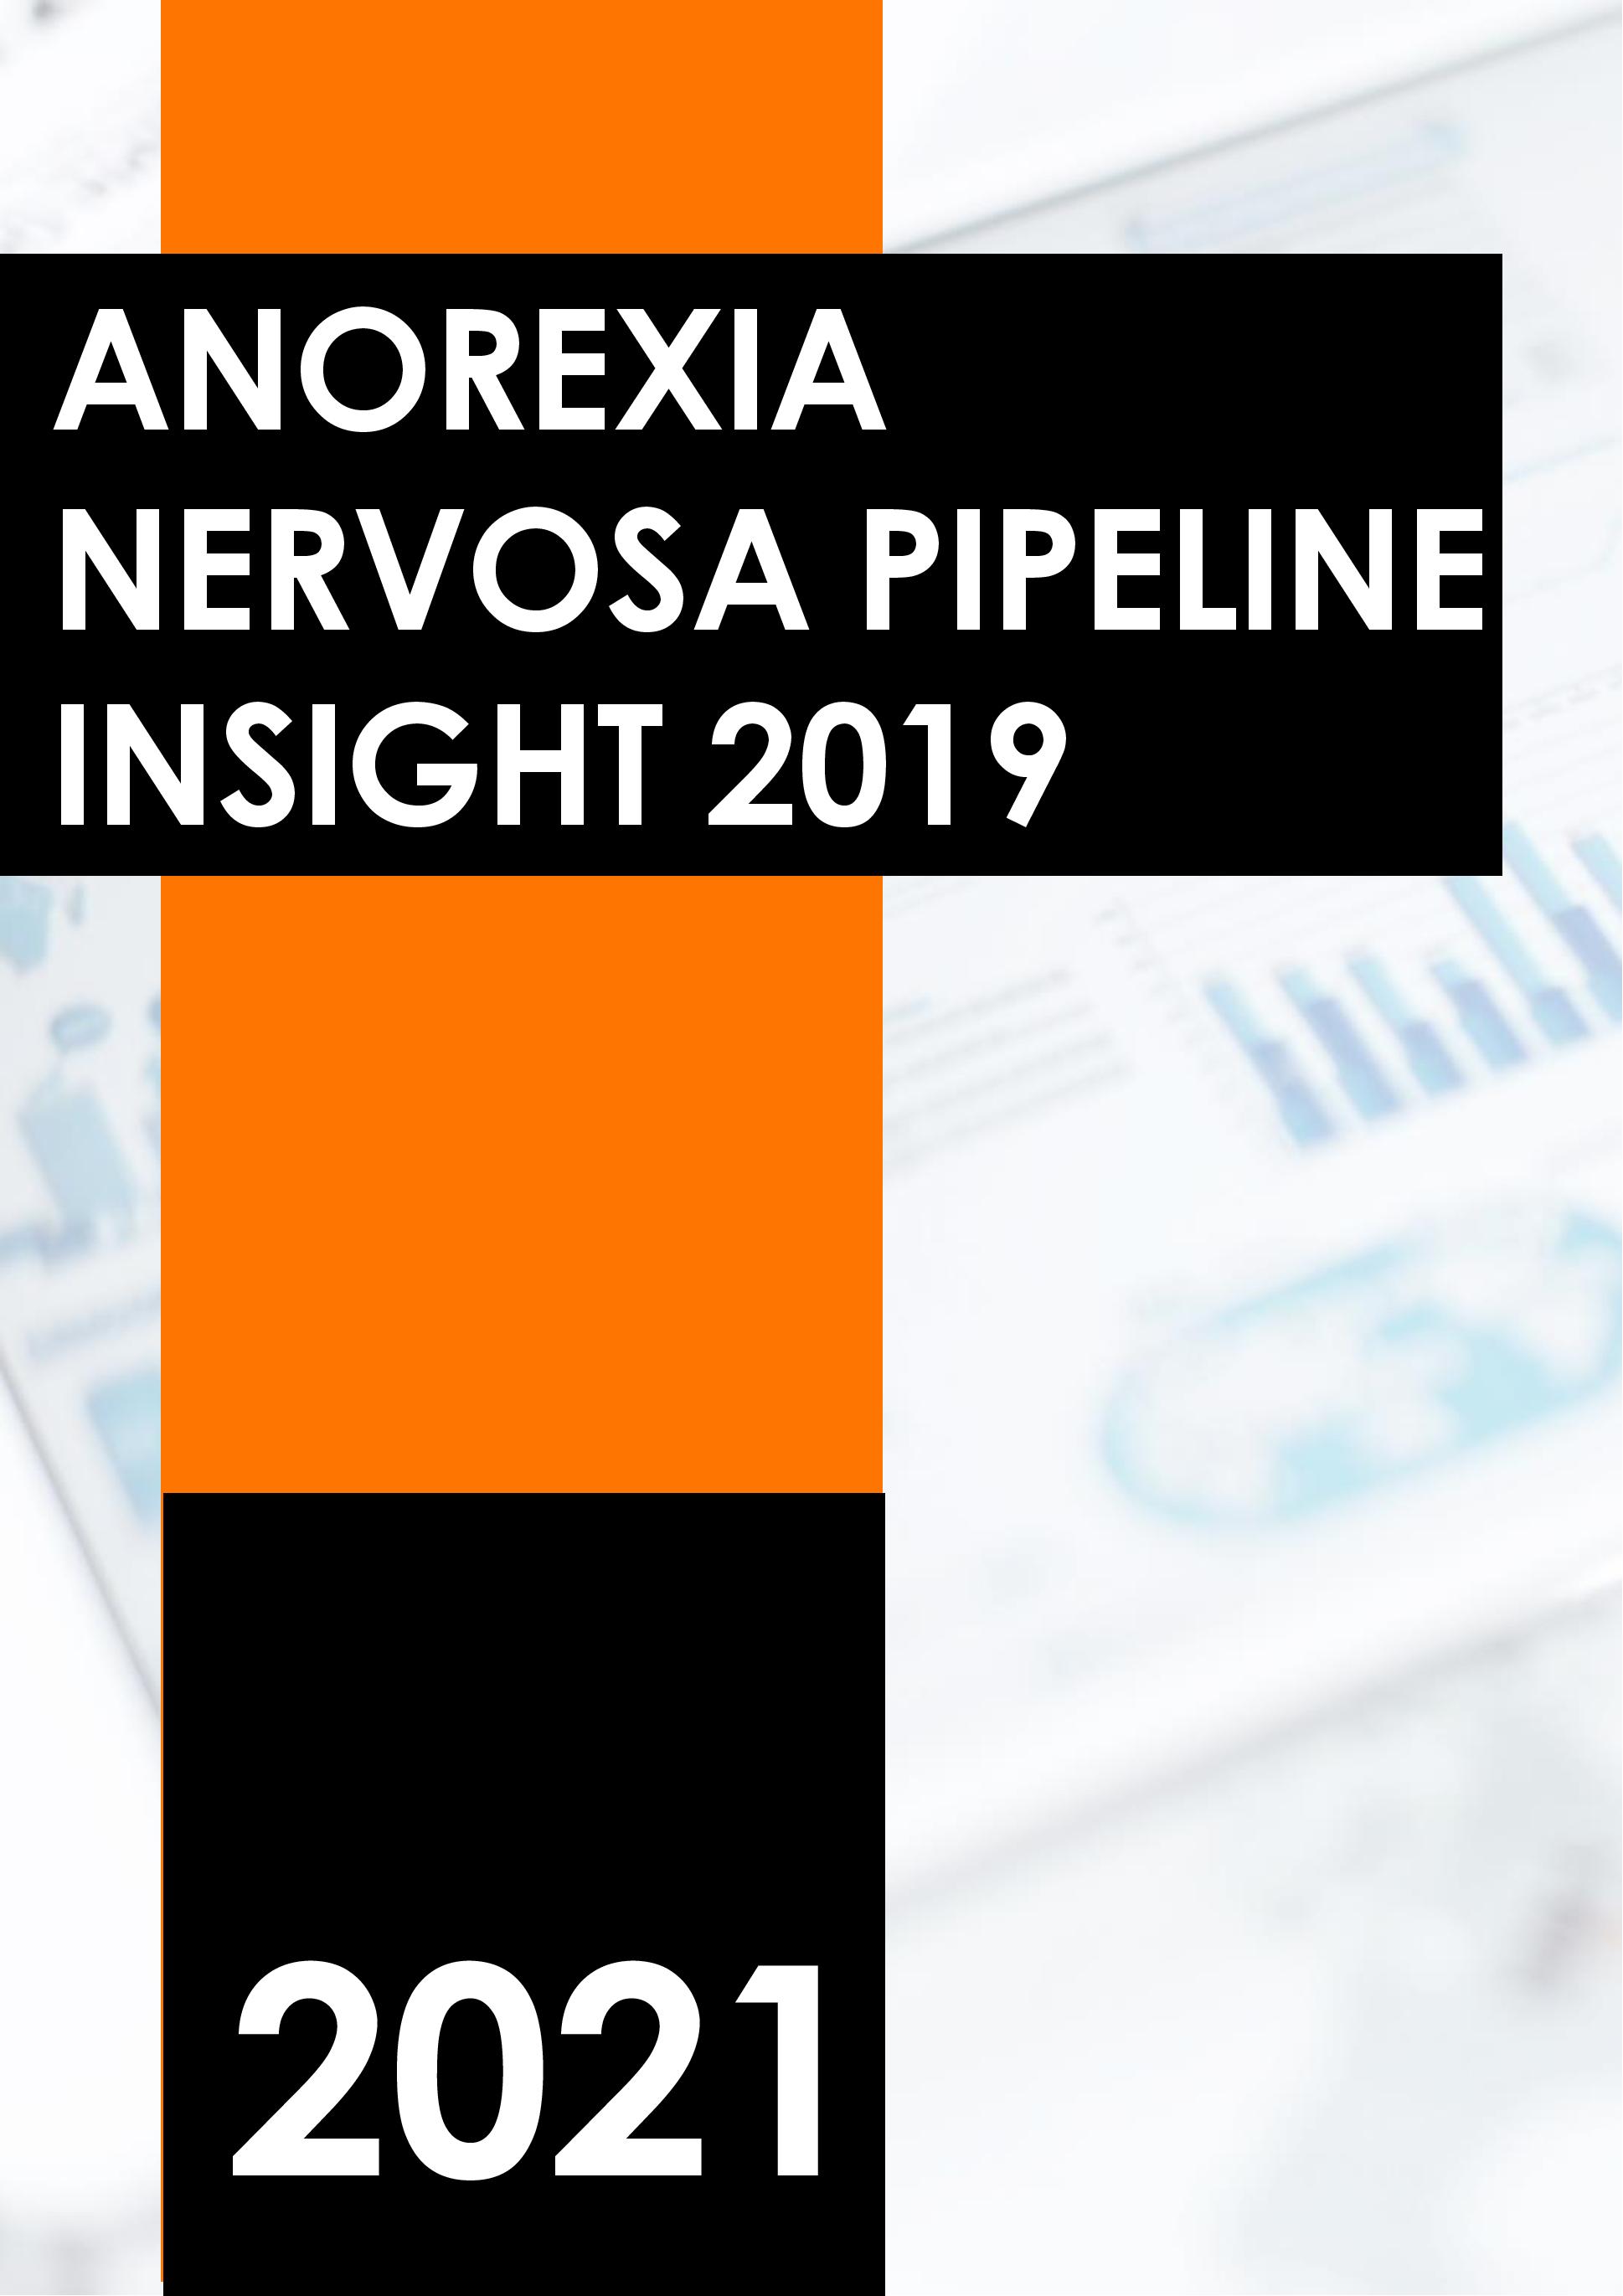 Anorexia Nervosa Pipeline Insight 2019